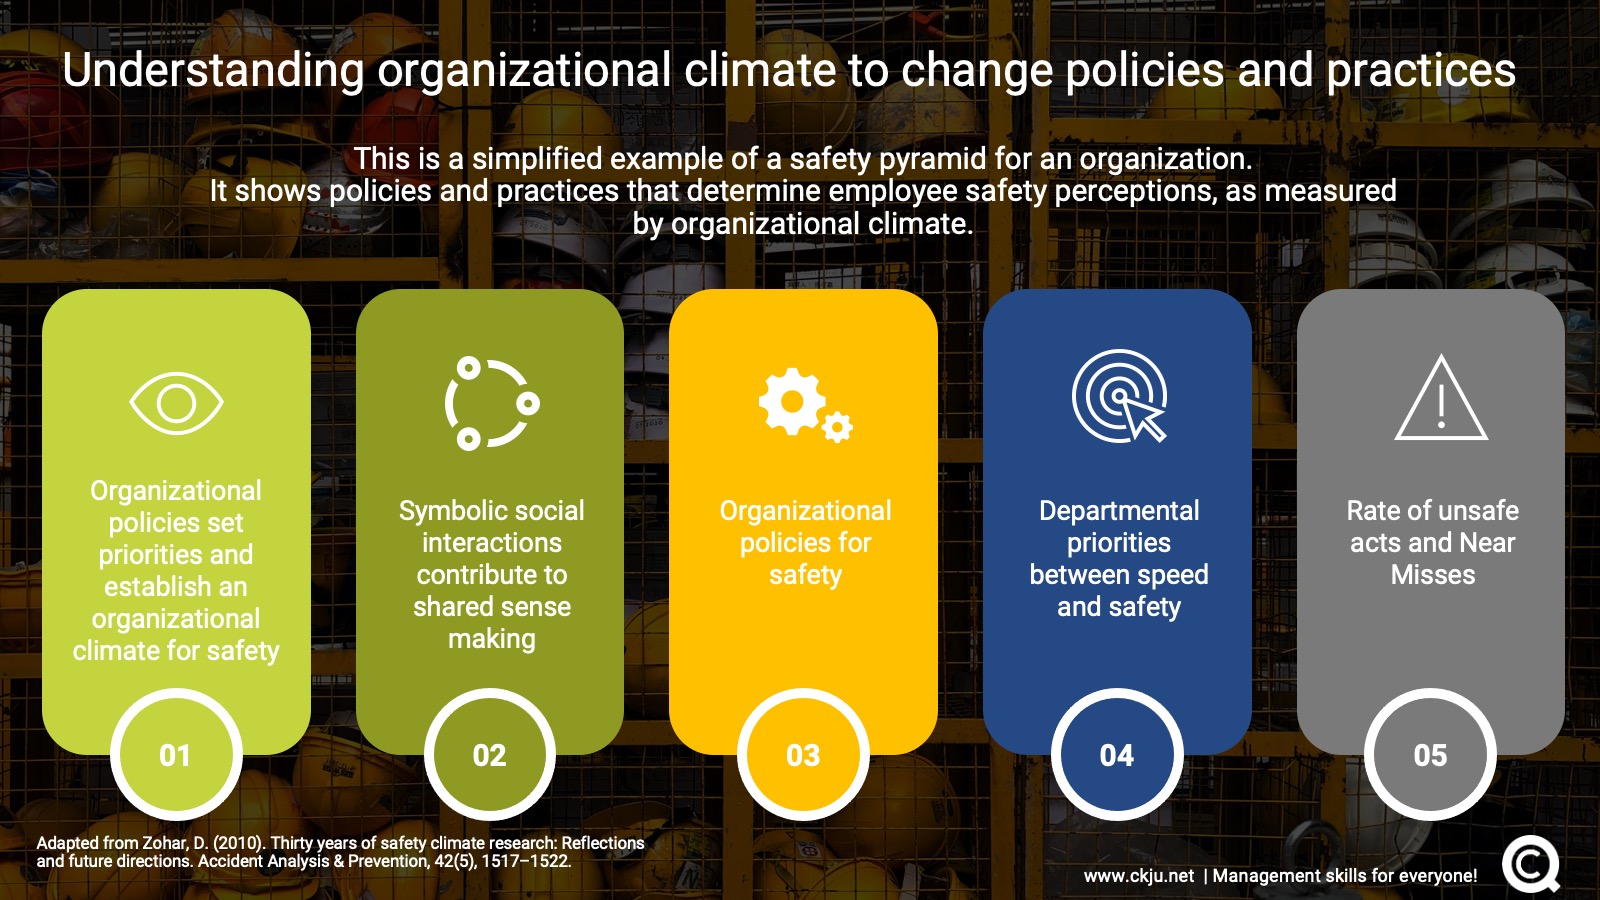 Measuring organizational climate shows which policies shape perceptions on safety